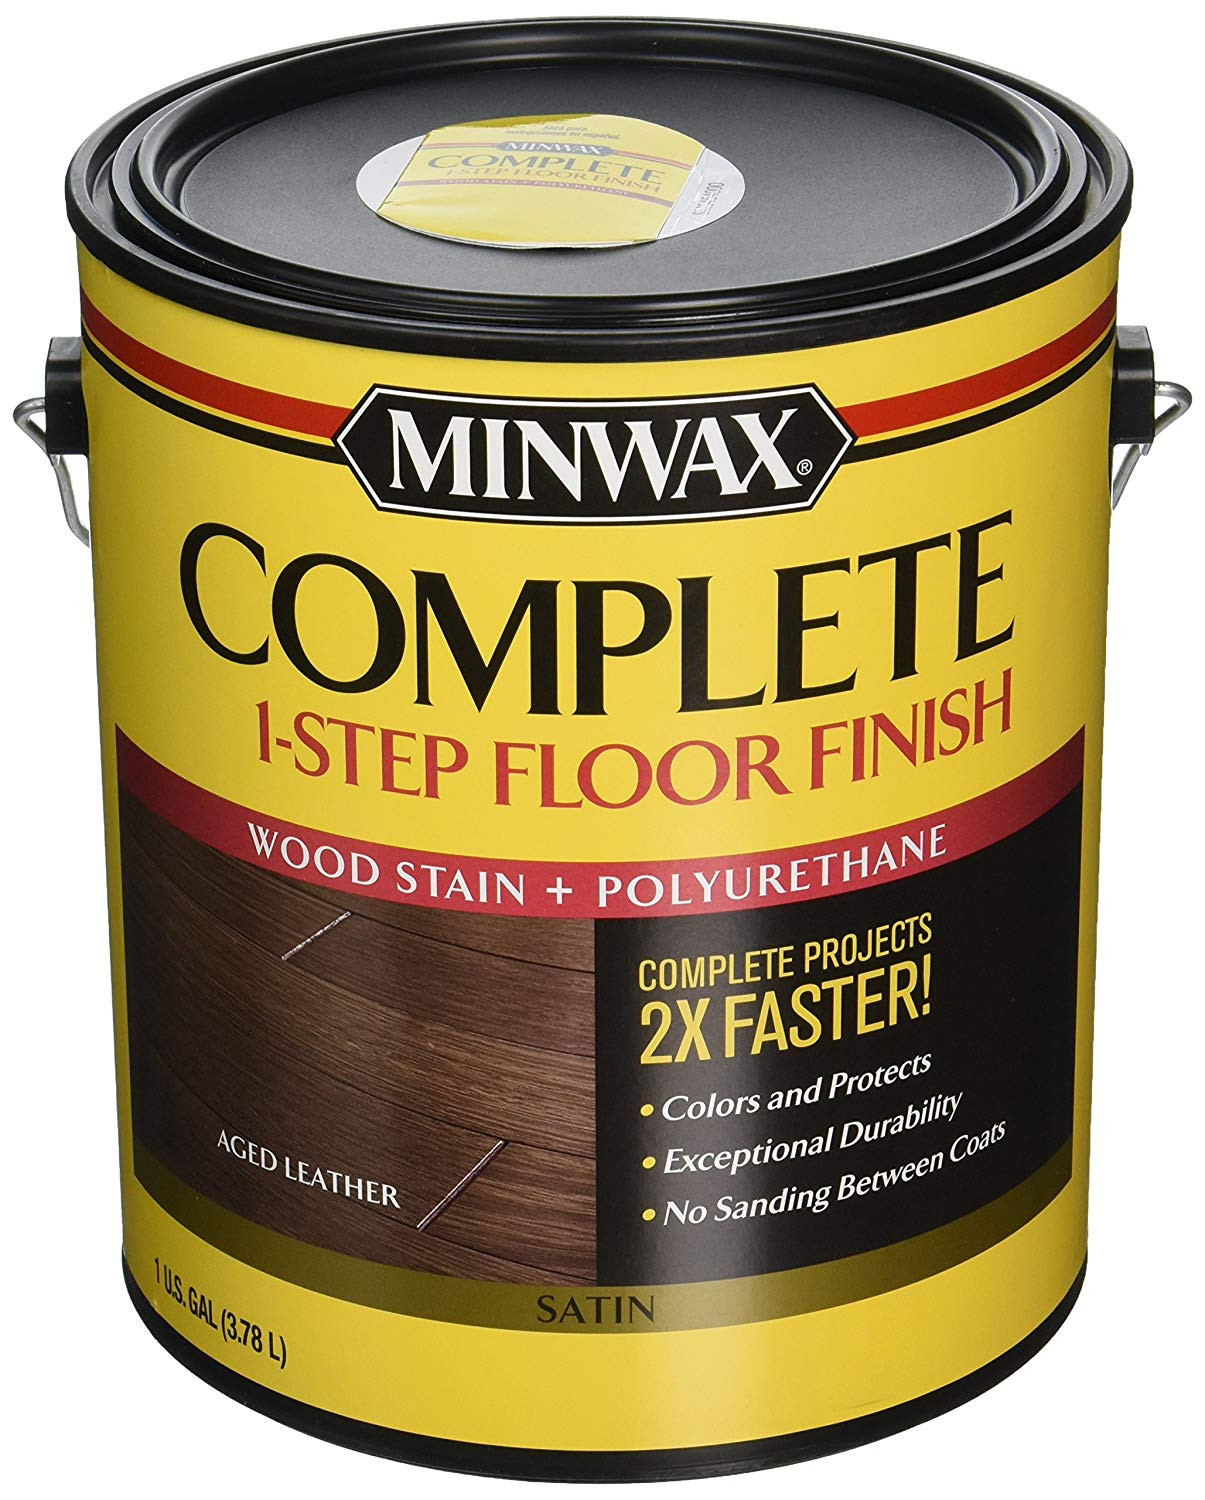 14 attractive Hardwood Floor Pattern Names 2024 free download hardwood floor pattern names of minwax 672050000 67205 1g satin aged leather complete 1 step floor with regard to minwax 672050000 67205 1g satin aged leather complete 1 step floor finish am